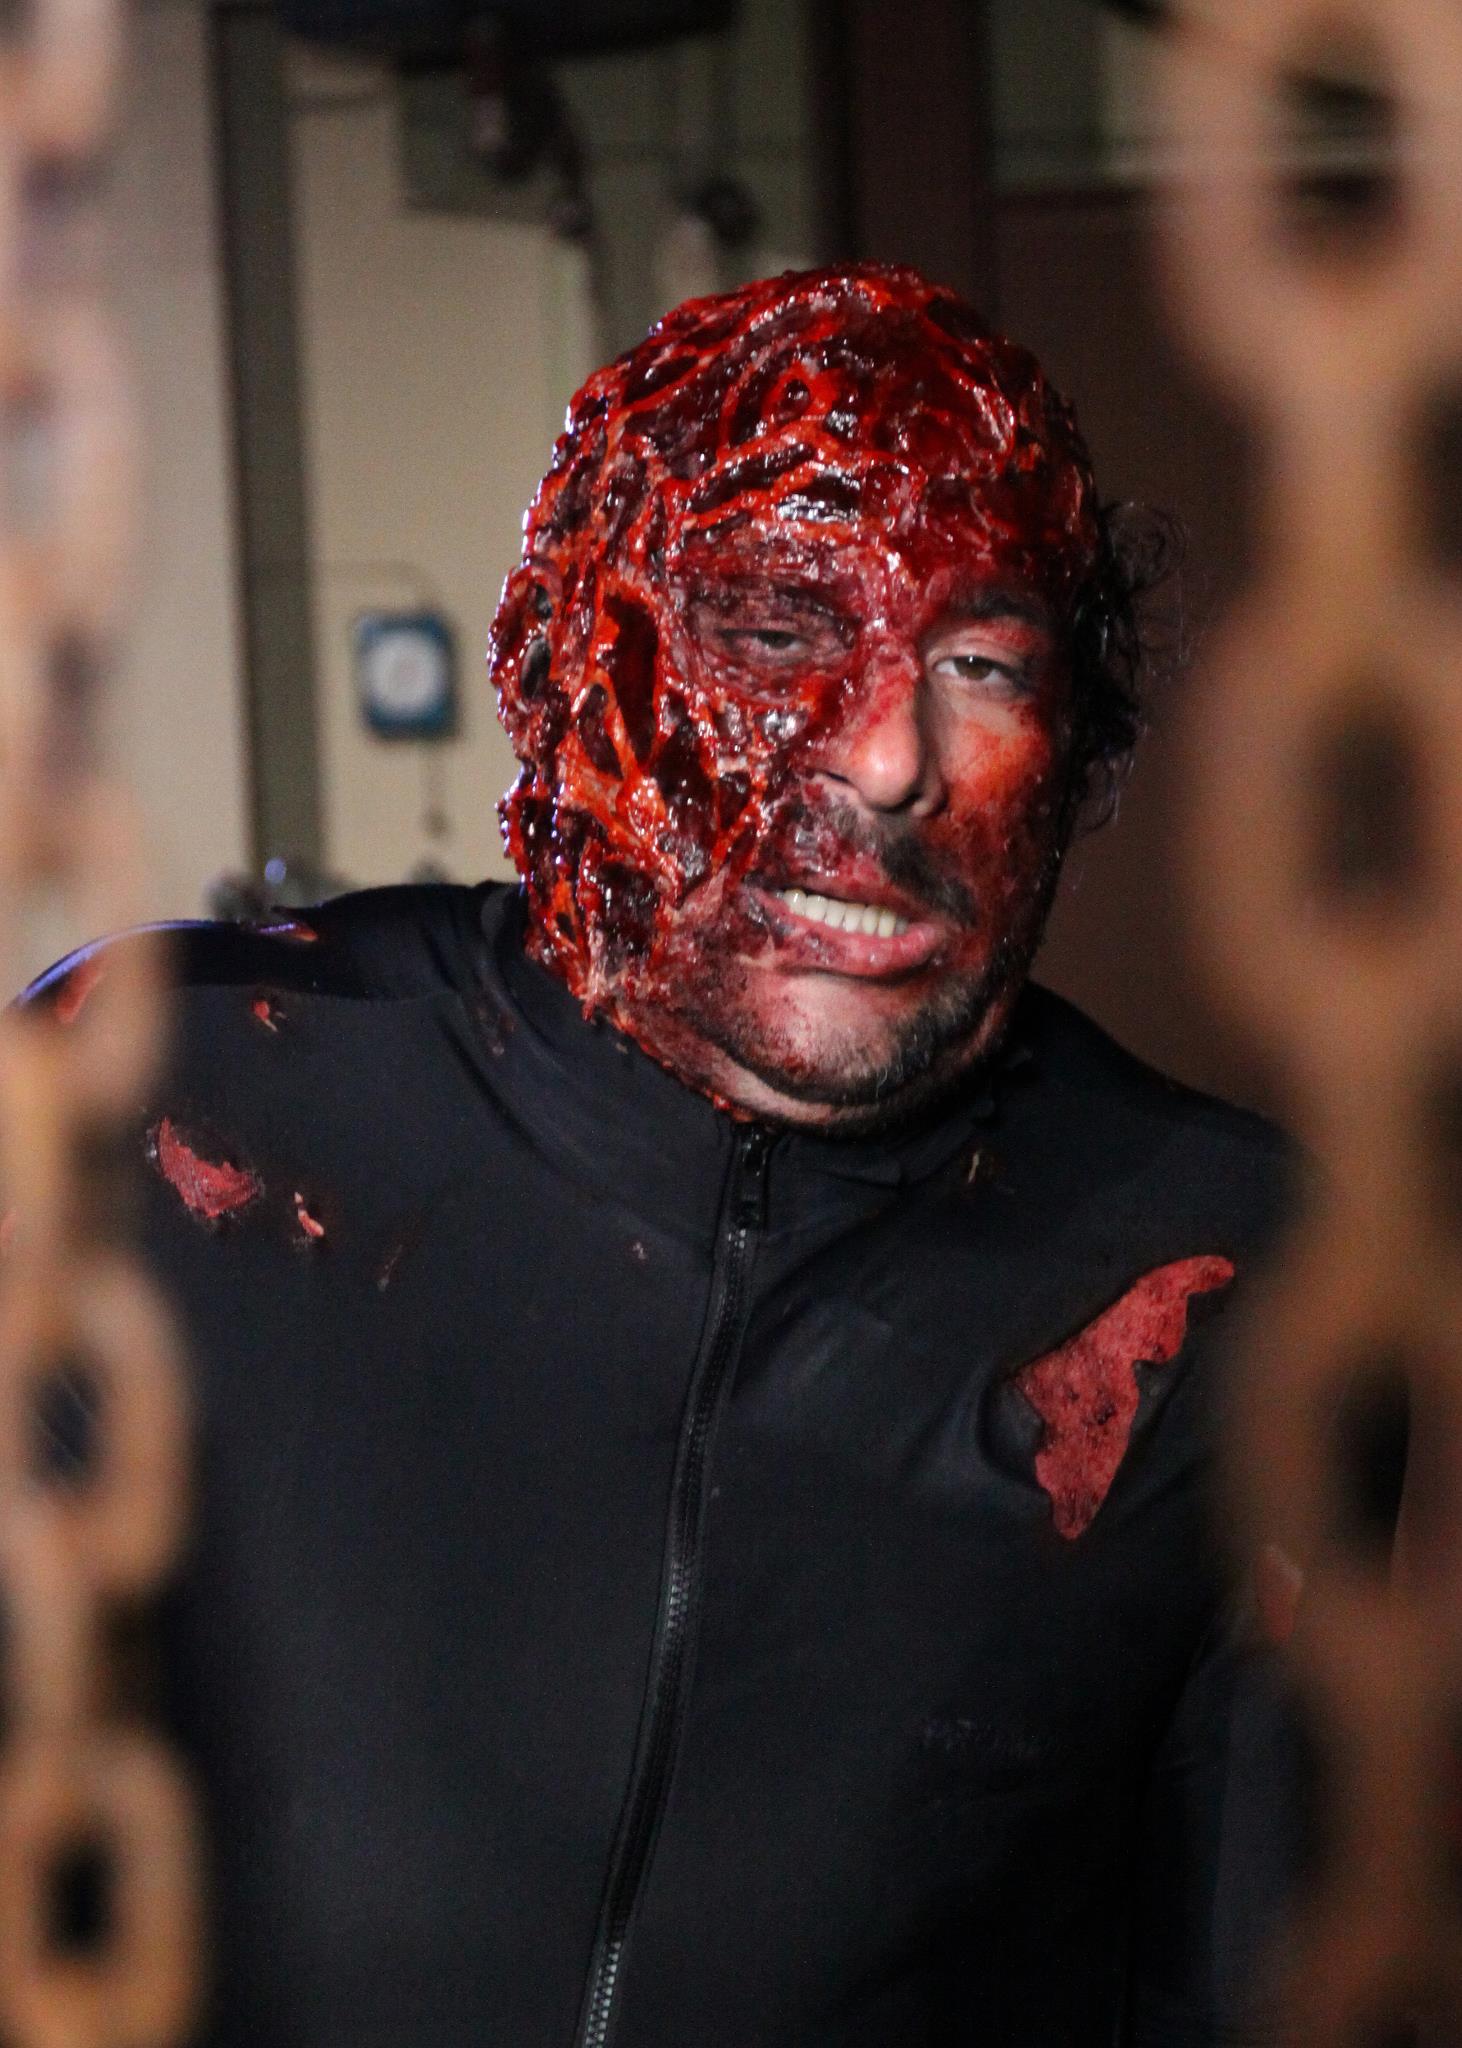 Jerry G. Angelo in makeup as the demonized Zombie Hanson